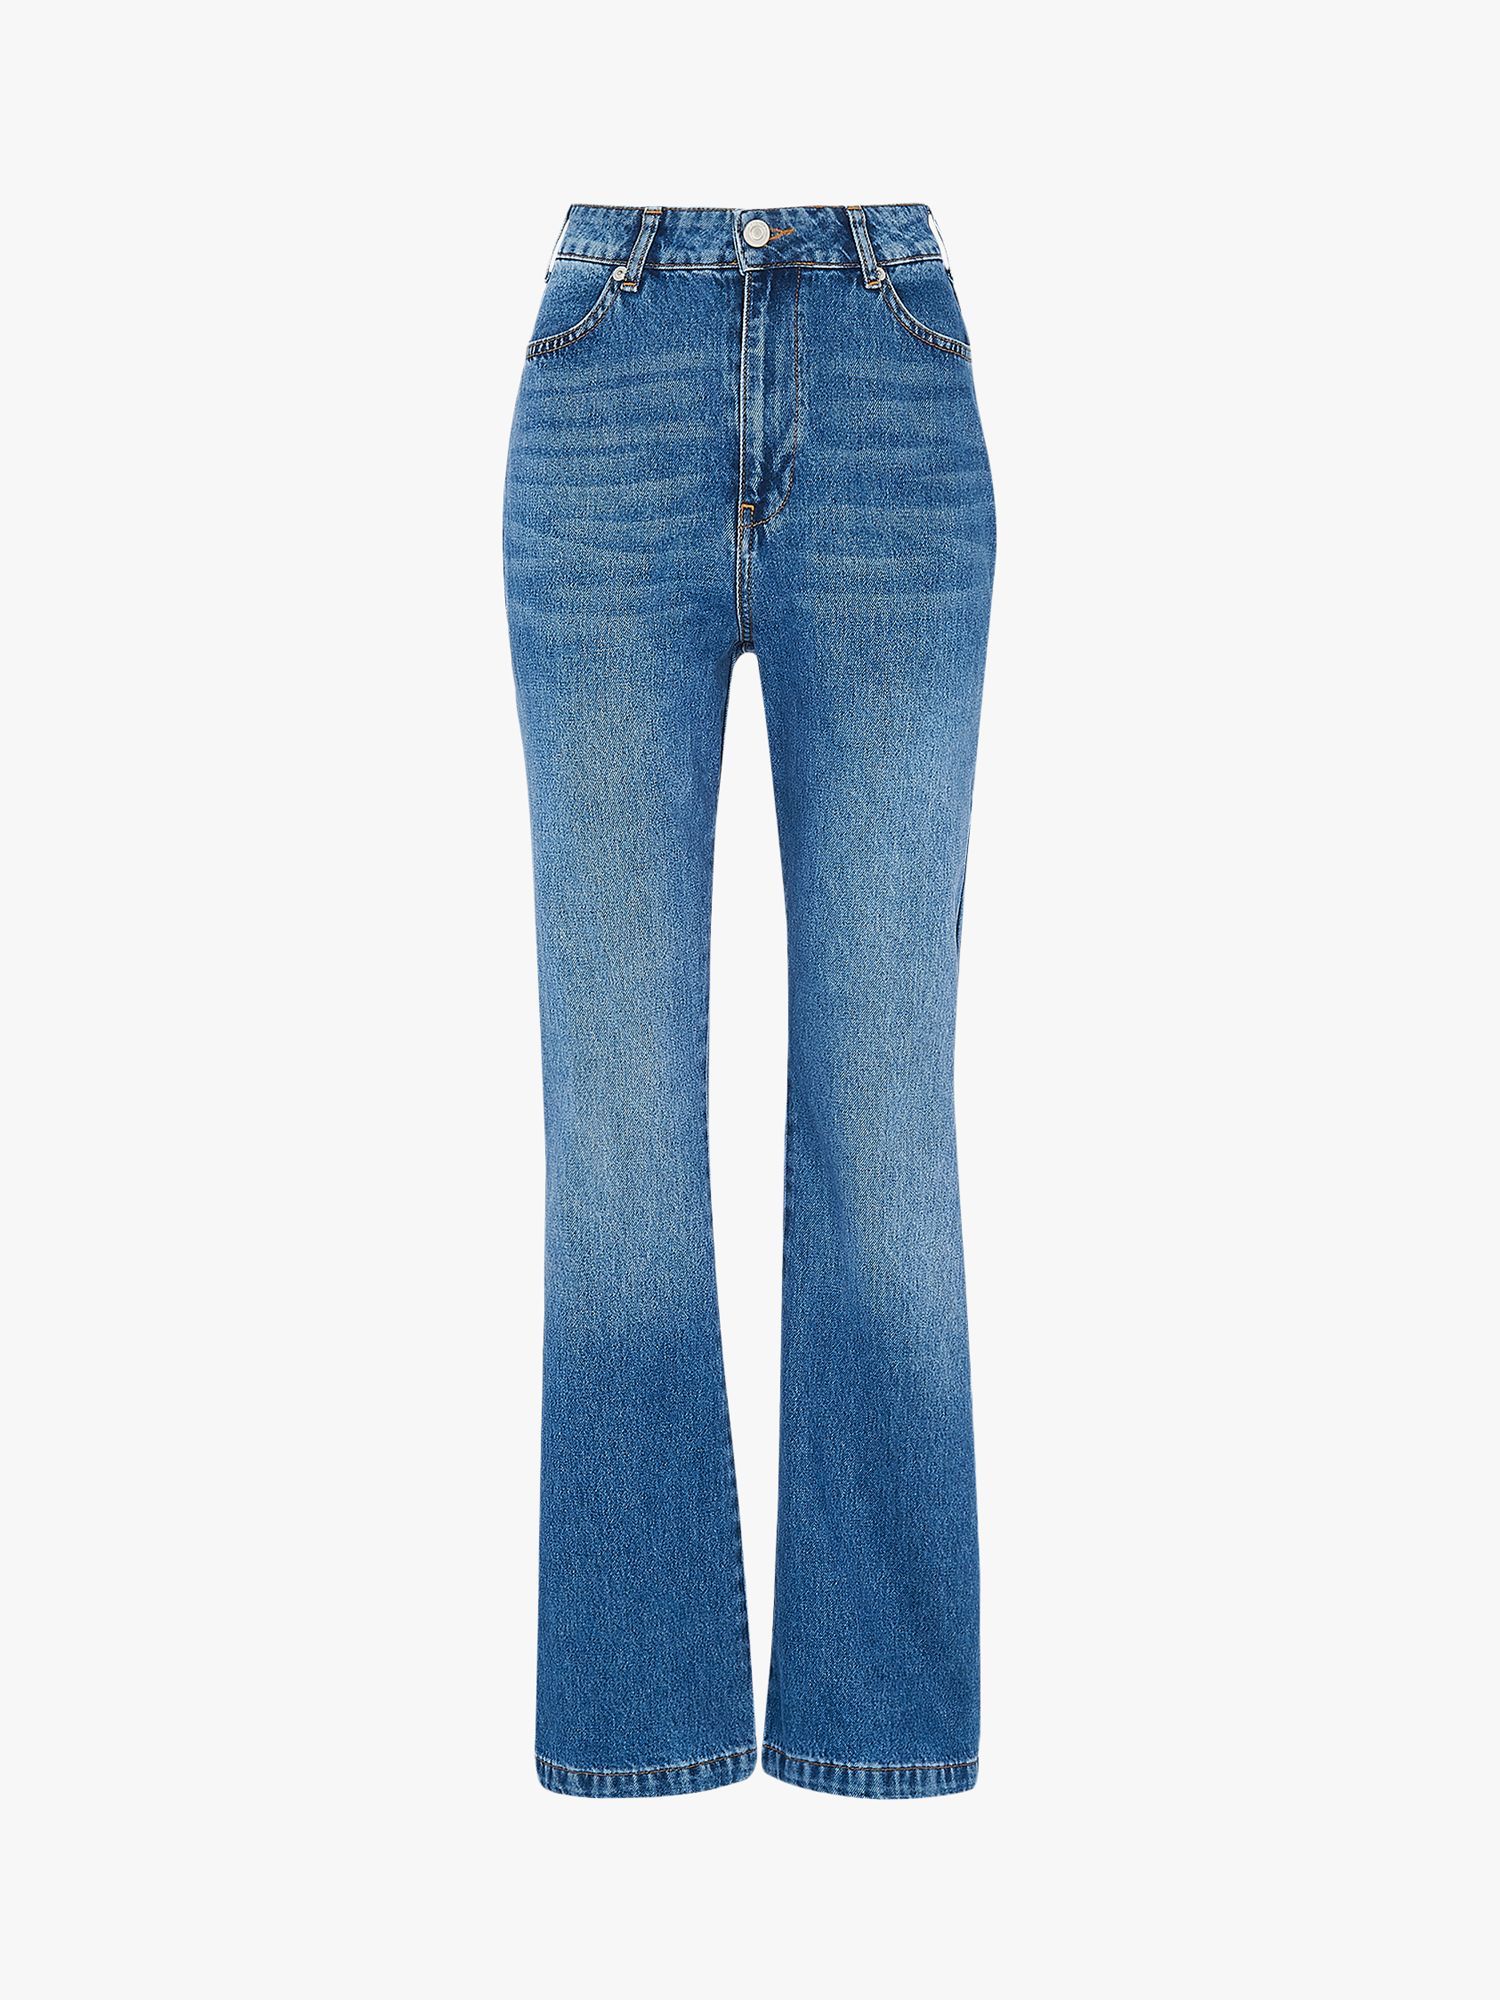 Whistles Authentic Flared Jeans, Denim at John Lewis & Partners